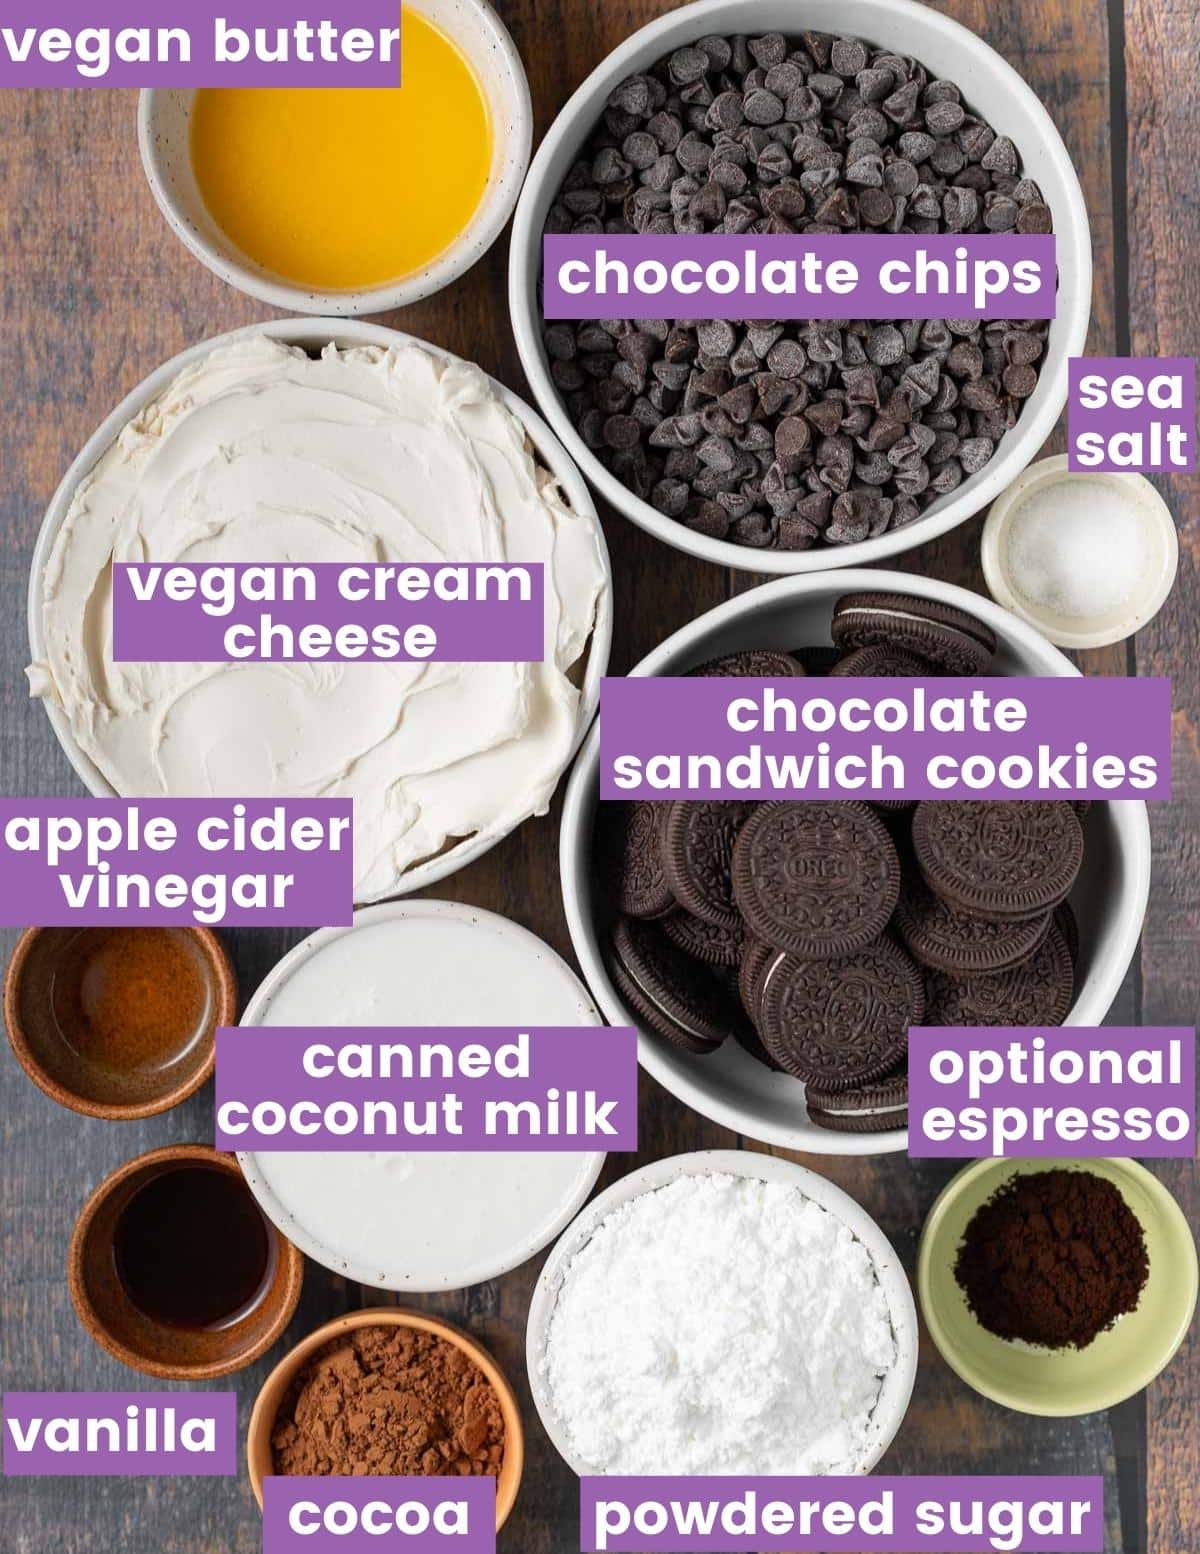 ingredients to make a vegan chocolate cheesecake as per the written ingredient list